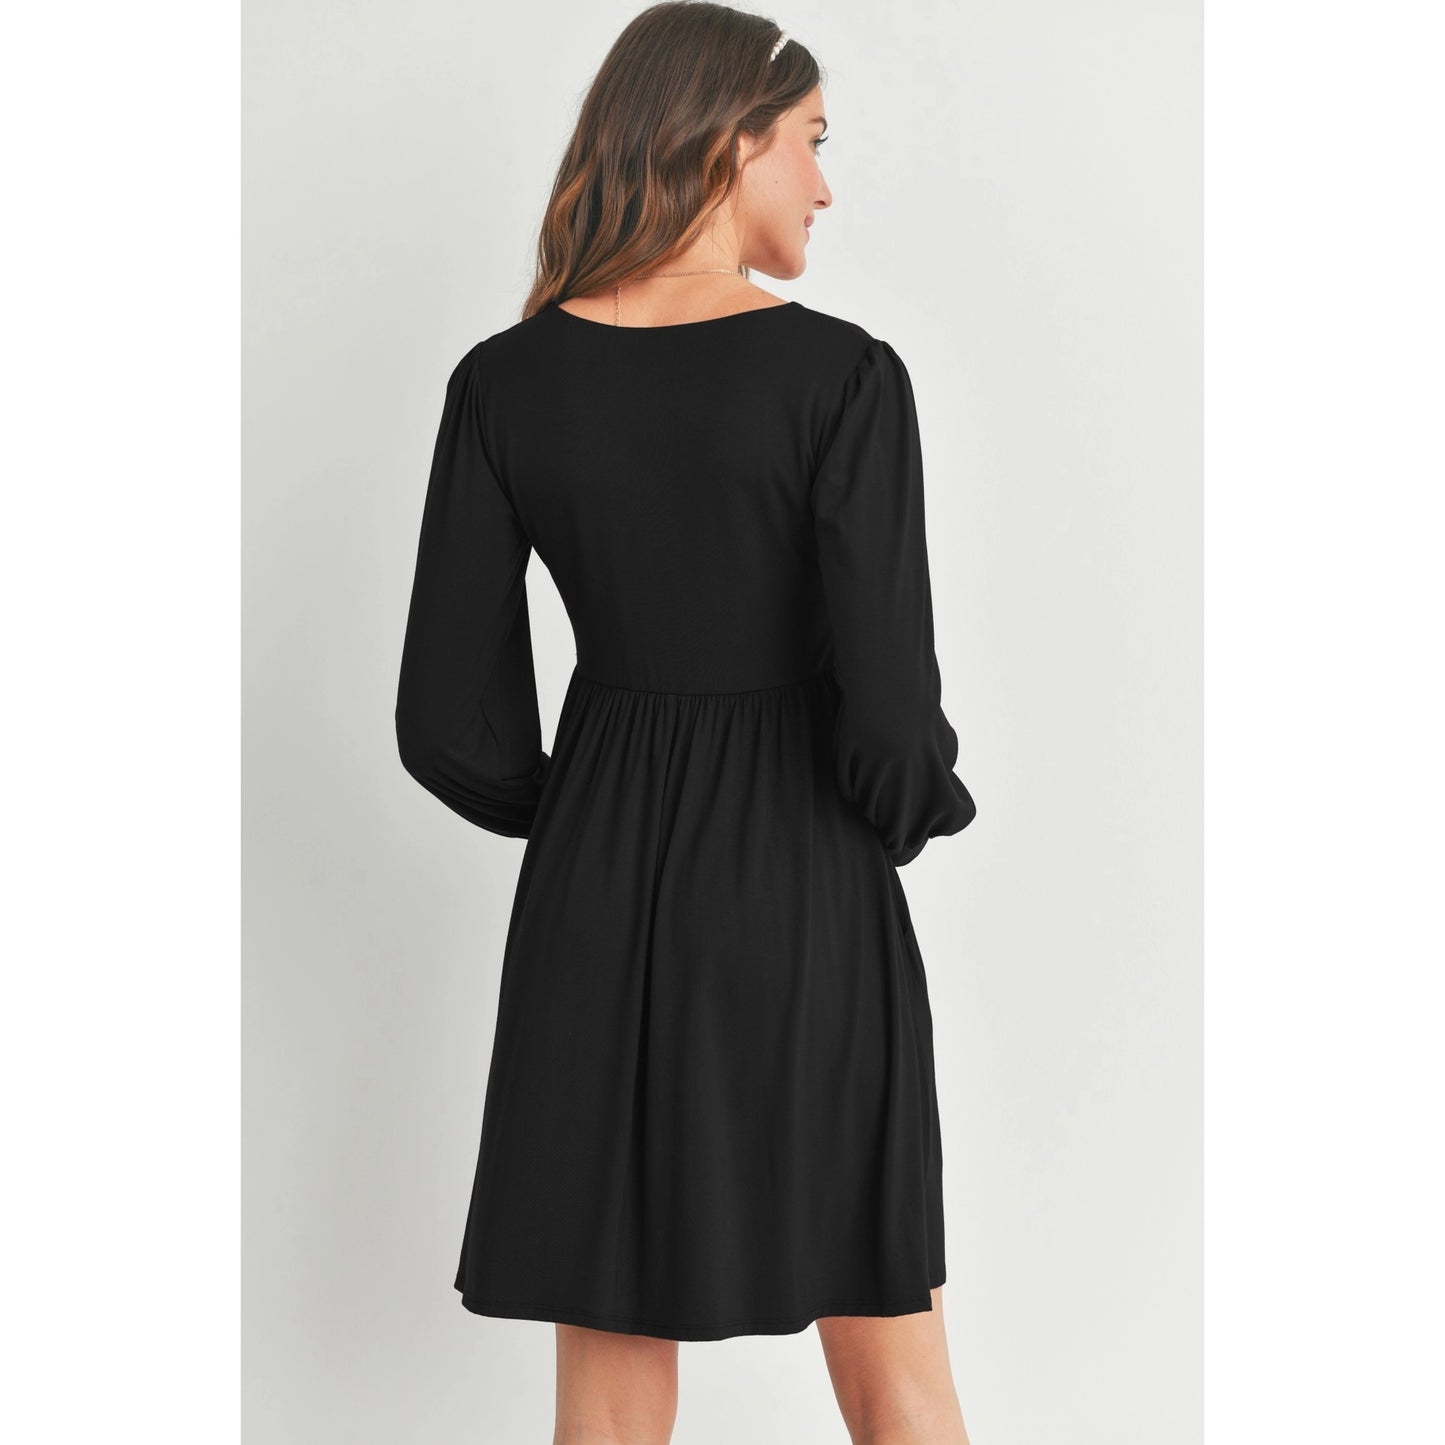 Wendy Black Maternity Dress (with pockets)